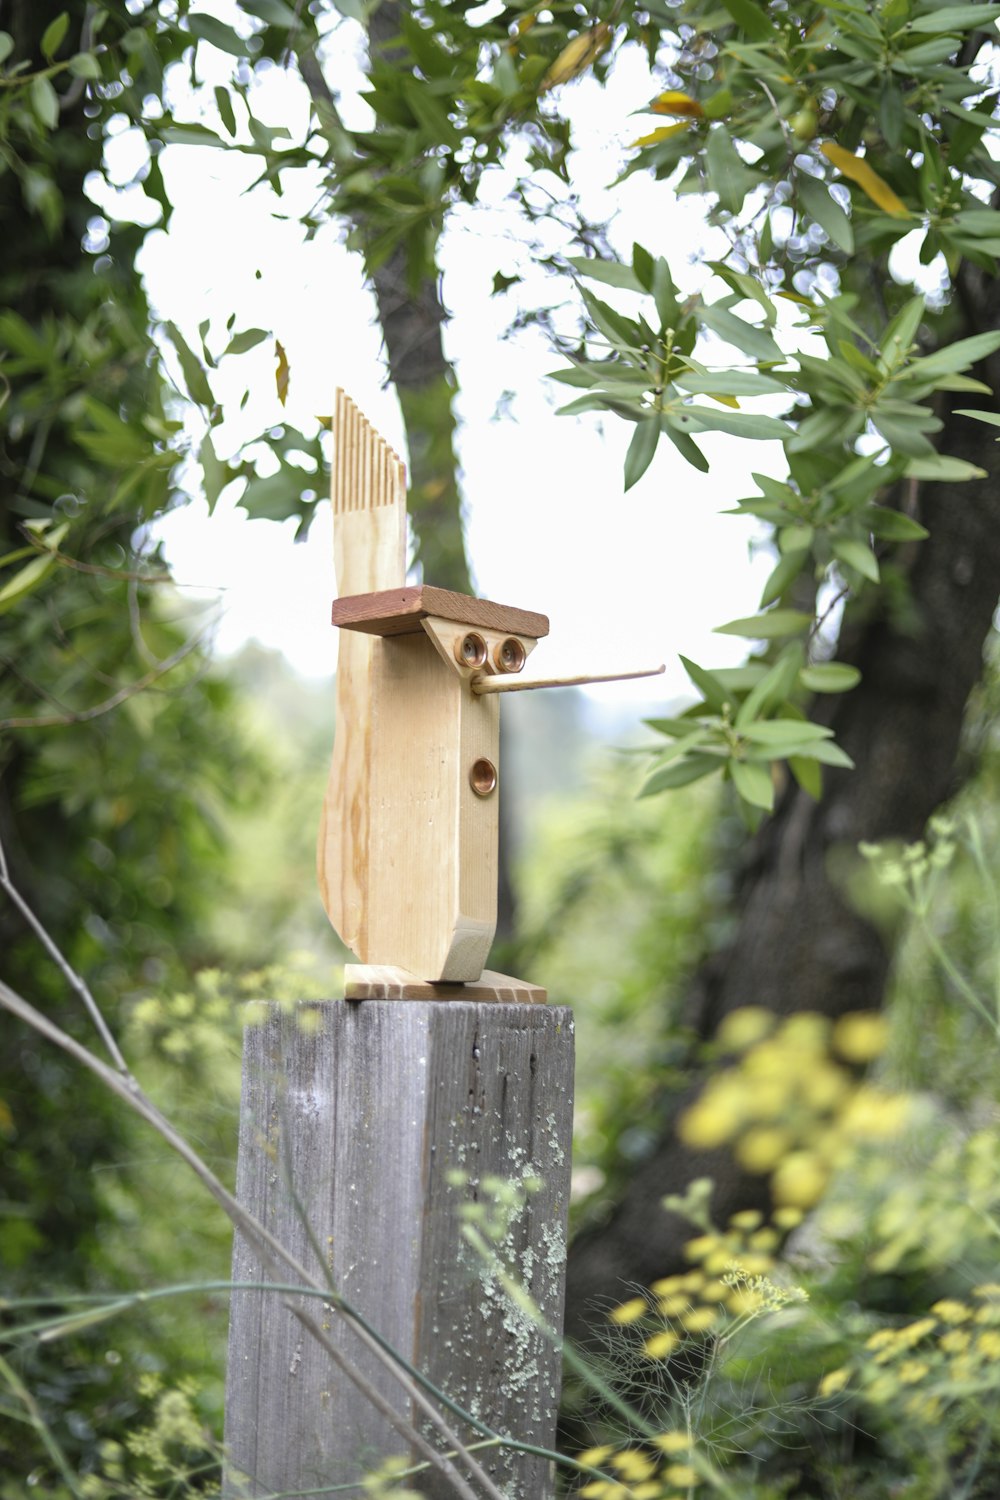 a wooden bird house sitting on top of a wooden post